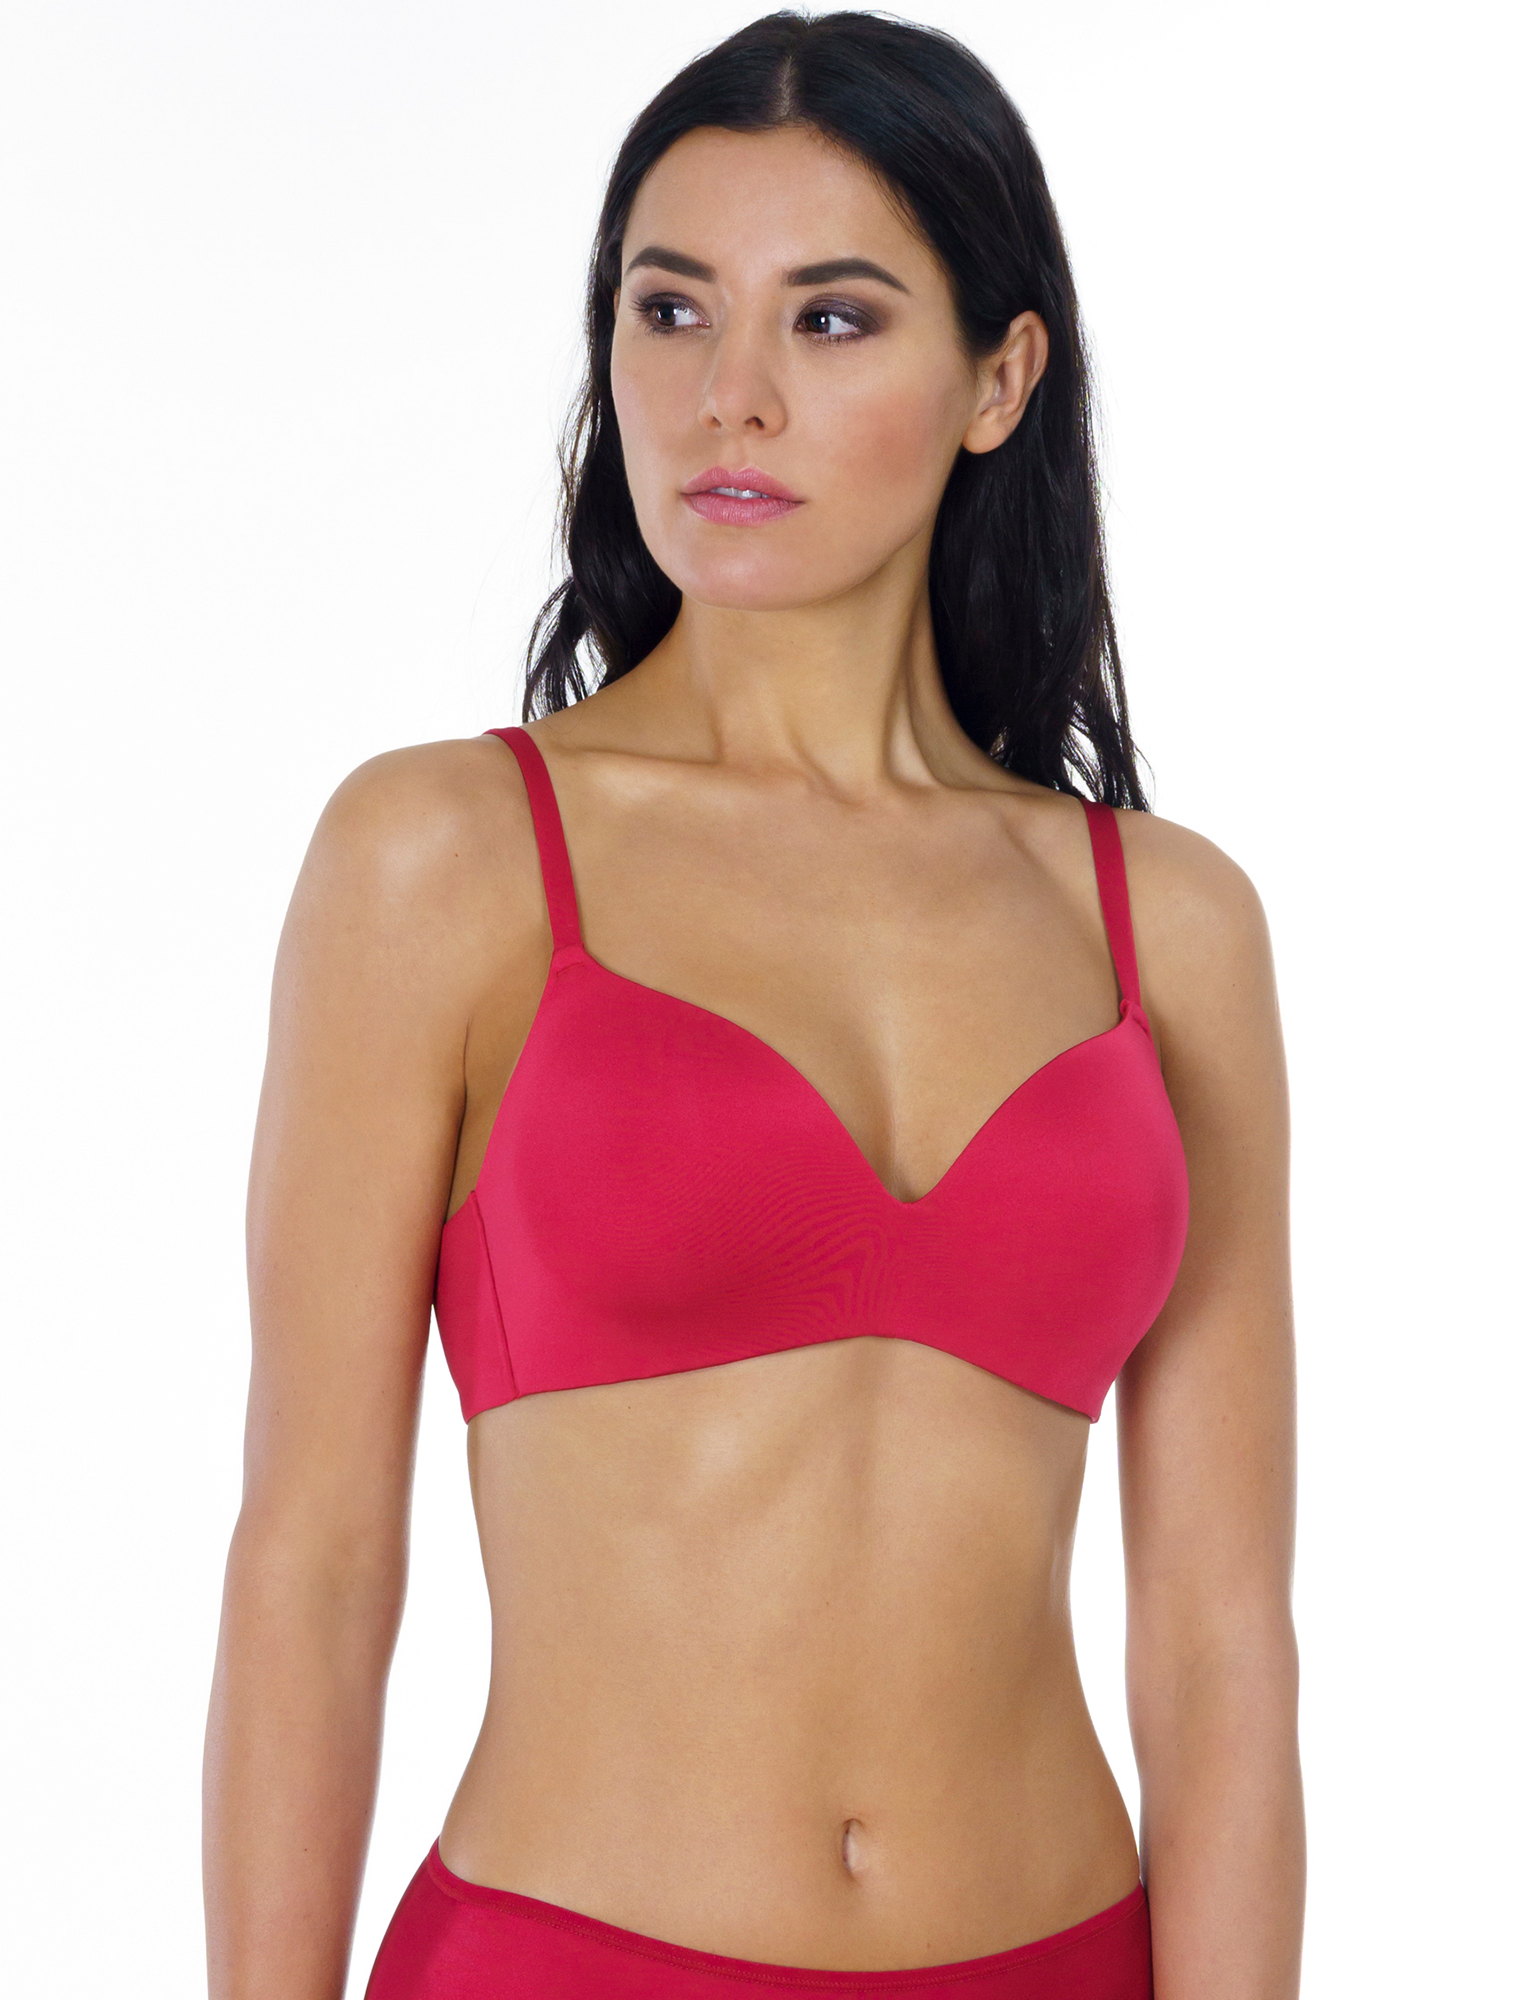 Lauma Lingerie Women's Wireless Bra with Moulded Cups, Collection